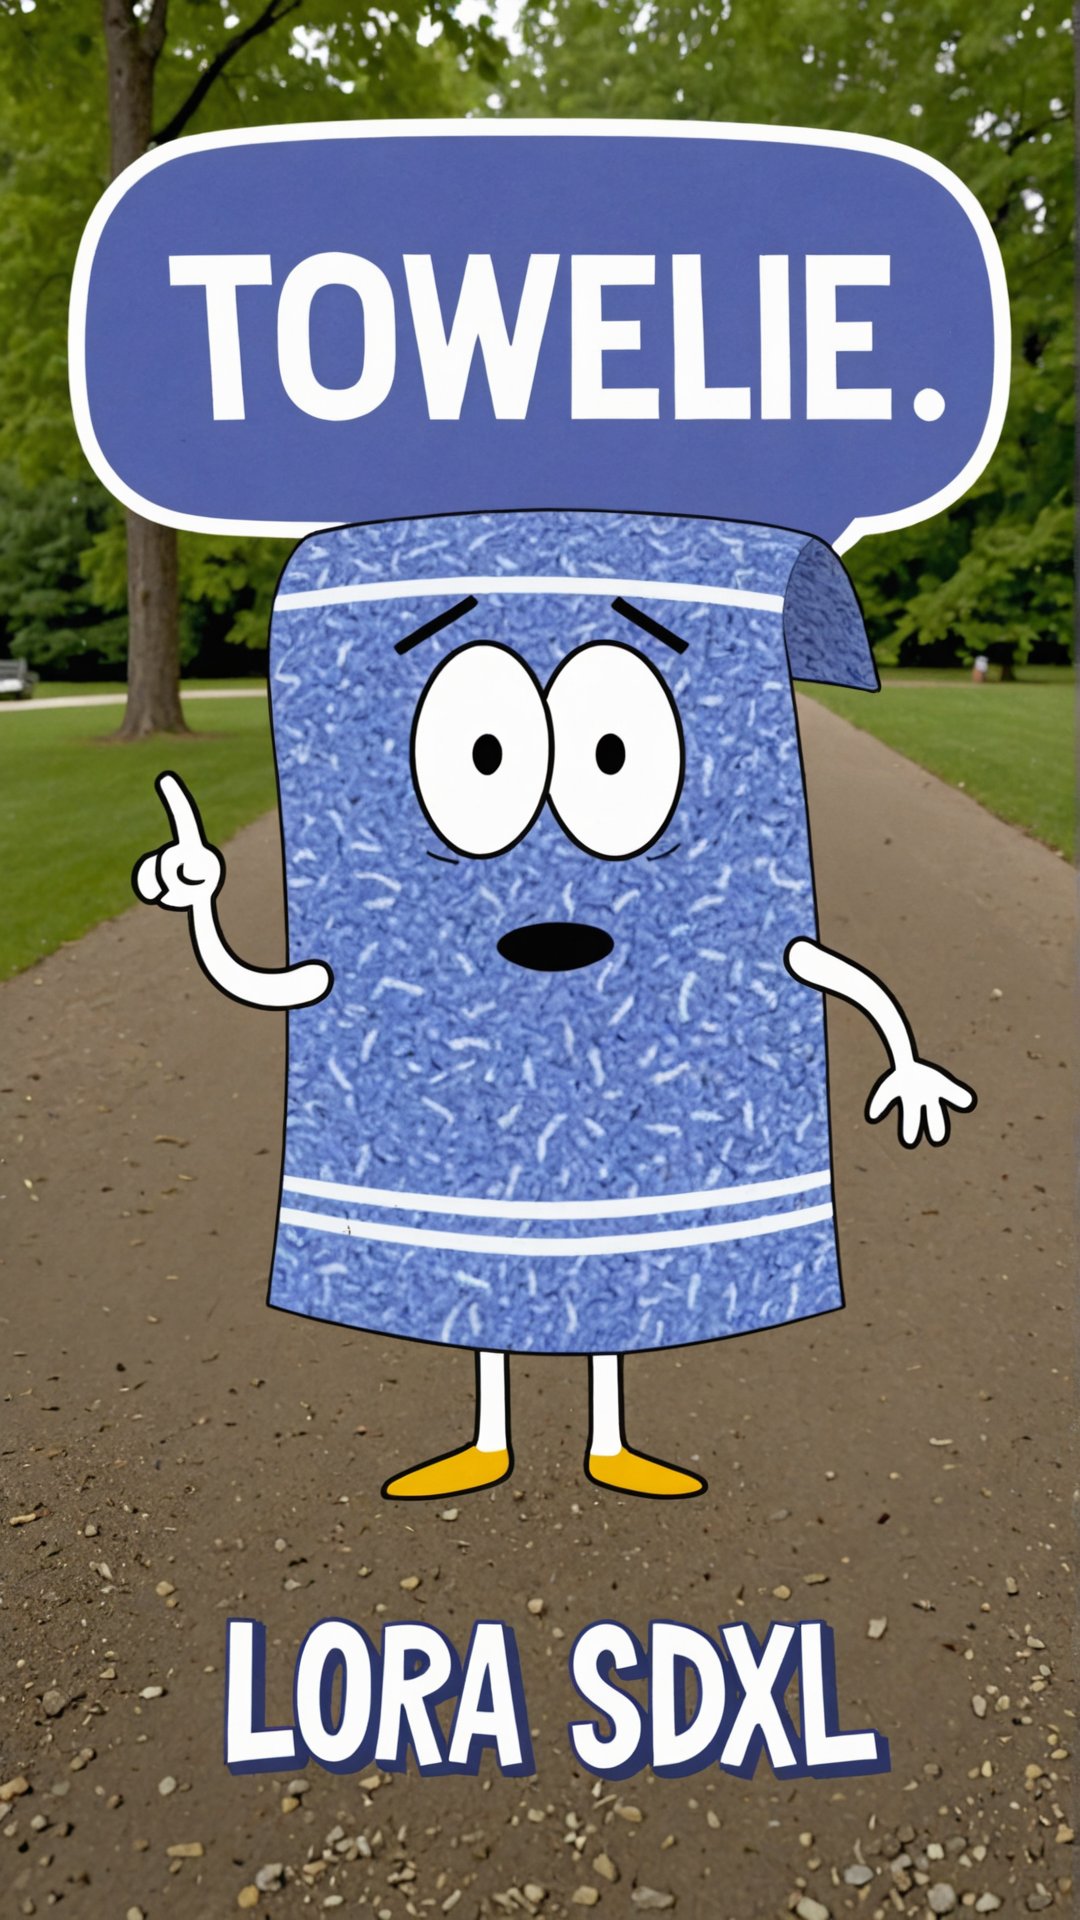 Photo of Towelie smoking weed at the park with a text bubble that says "Towelie SDXL LoRA" <lora:Towelie_v420:0.8>